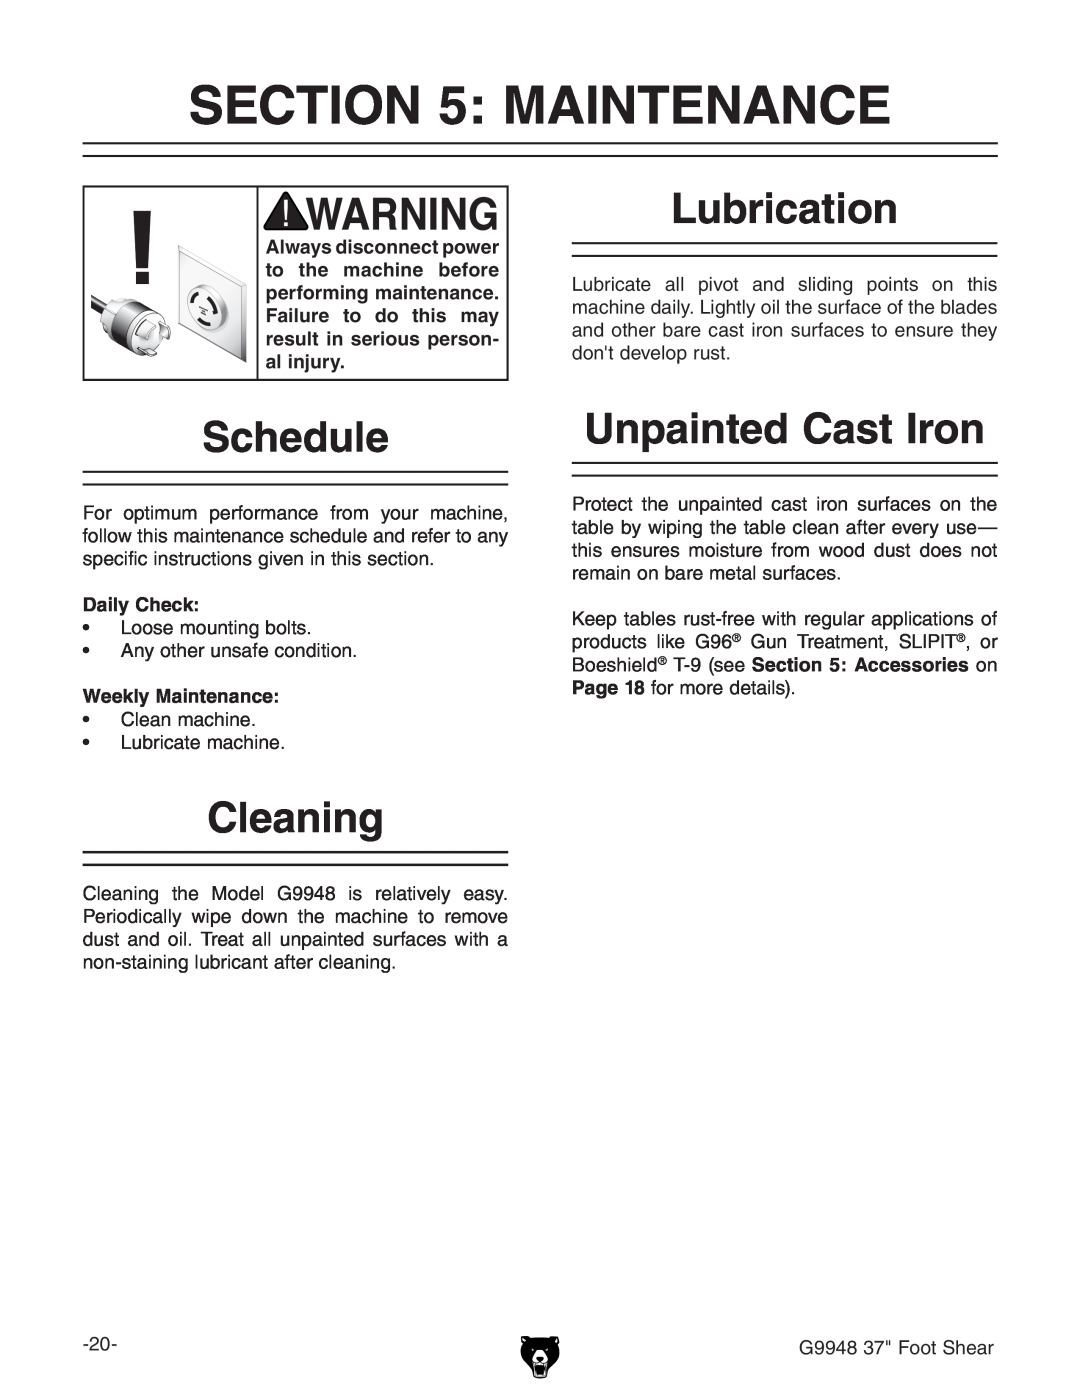 Grizzly G9948 owner manual Maintenance, Lubrication, Schedule, Unpainted Cast Iron, Cleaning, Daily Check, ,ddiHZVg 